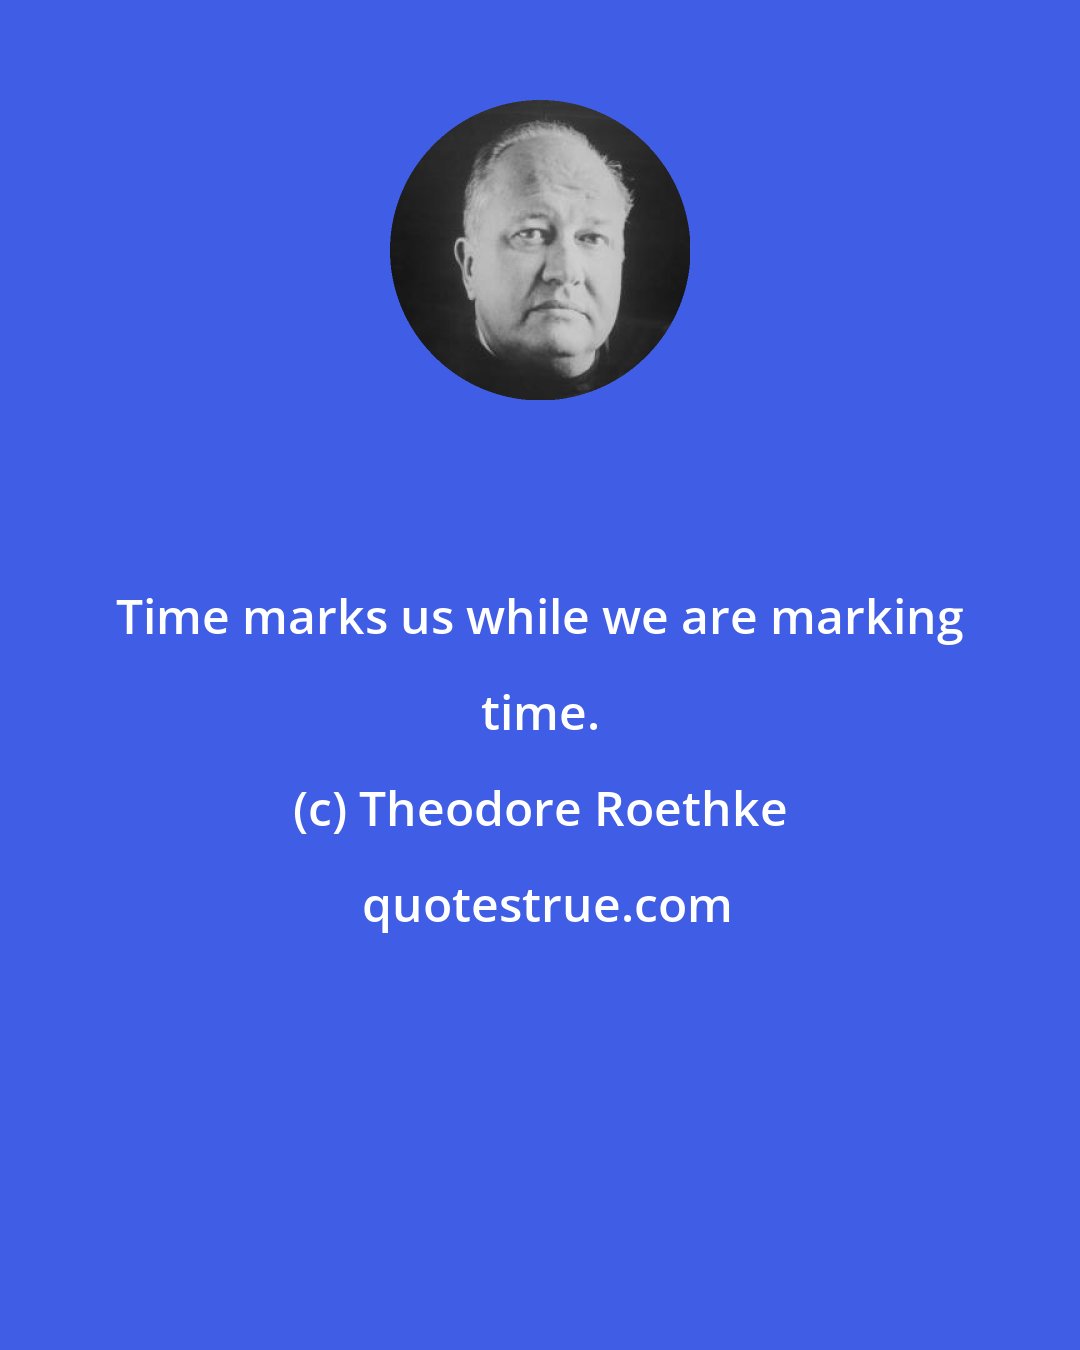 Theodore Roethke: Time marks us while we are marking time.